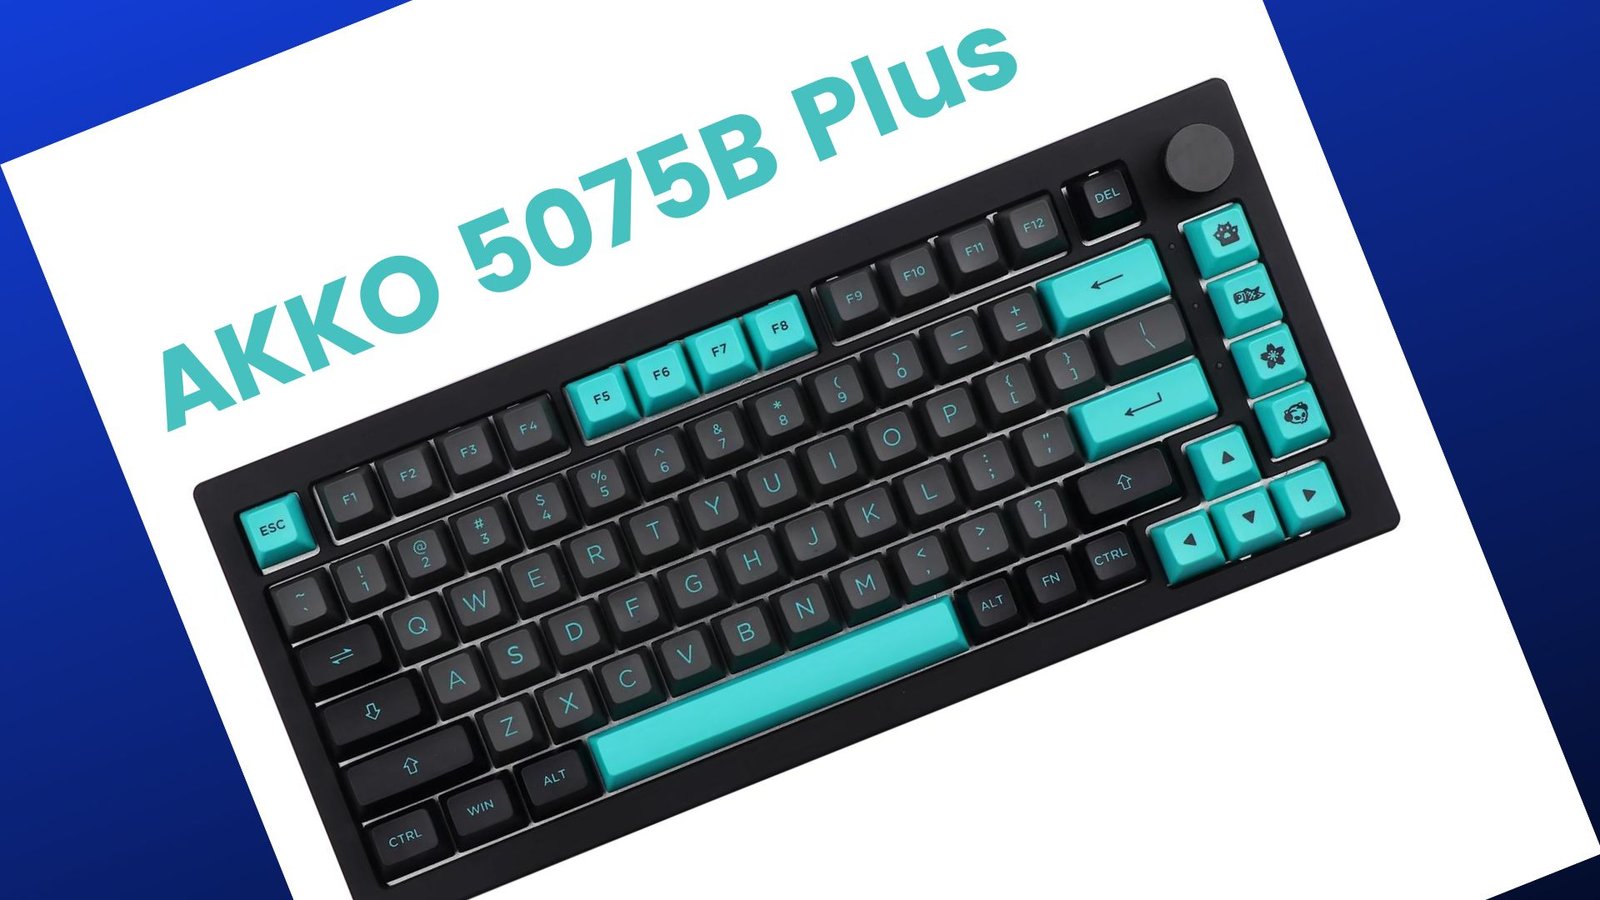 Review: AKKO 5075B Plus keyboard - Movies Games and Tech